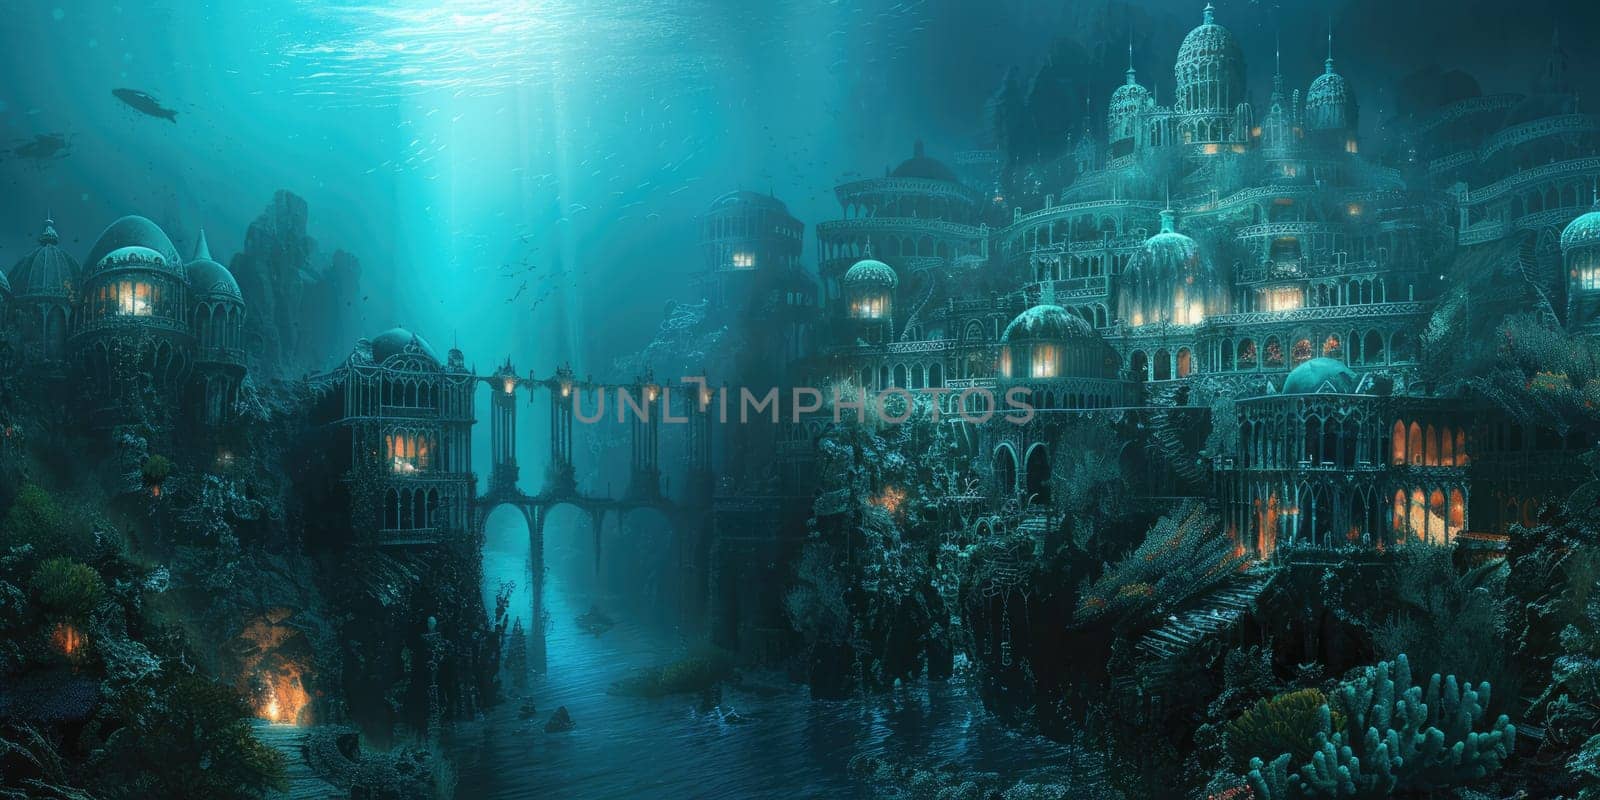 An underwater city with bioluminescent coral. Resplendent. by biancoblue